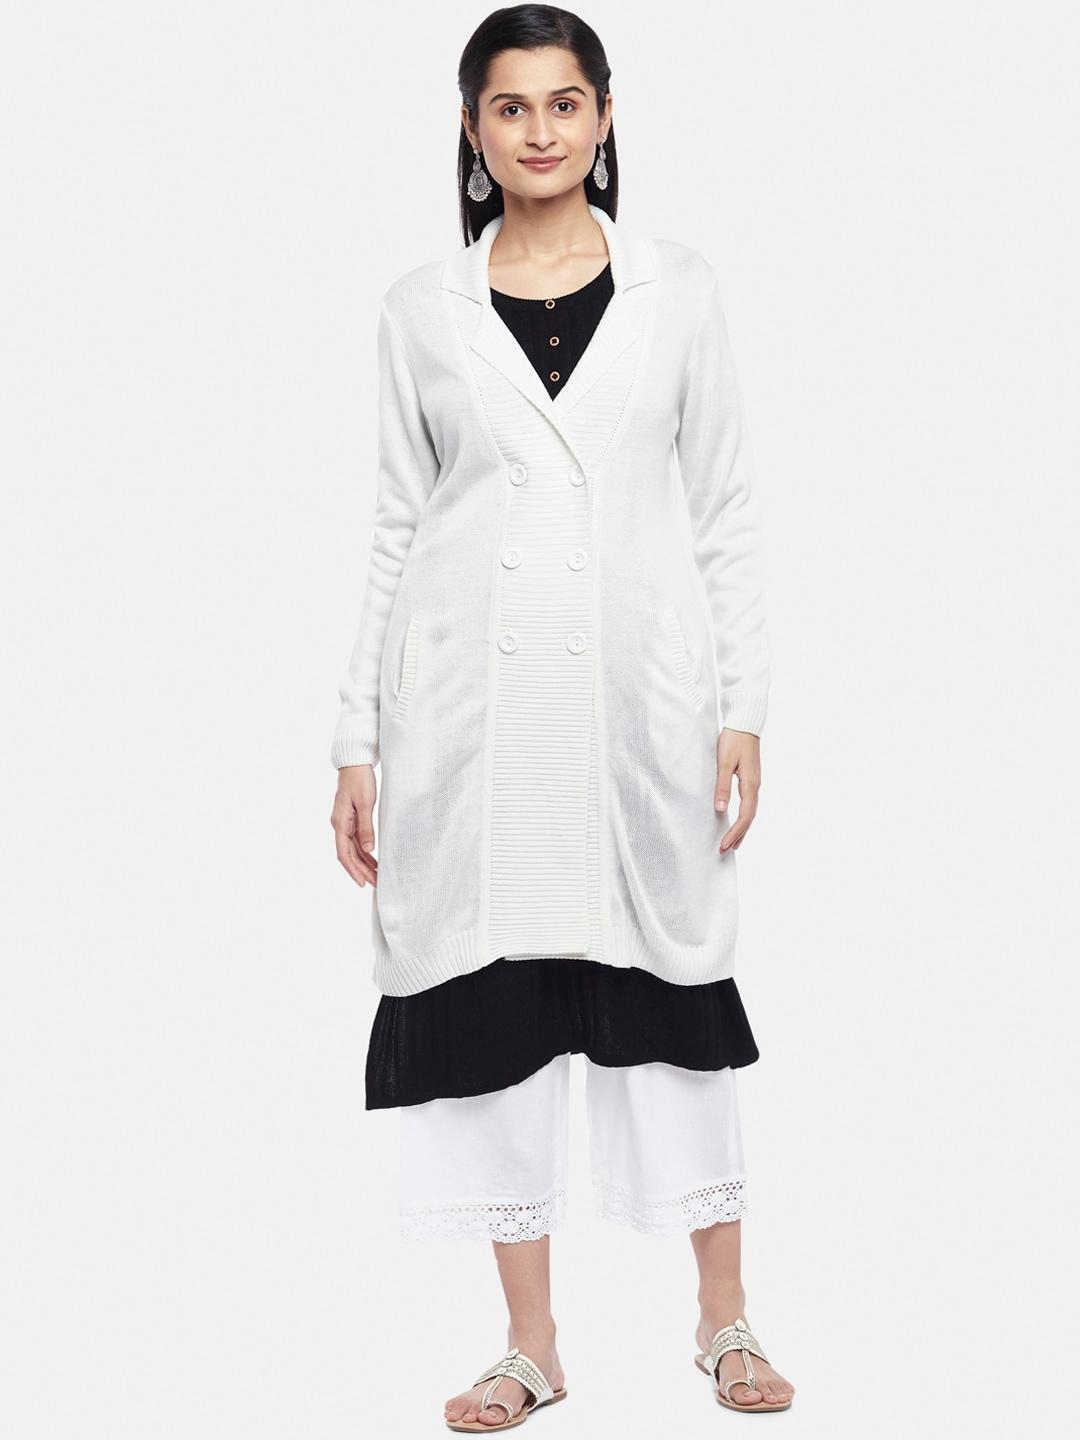 rangmanch by pantaloons women white solid double-breasted overcoat